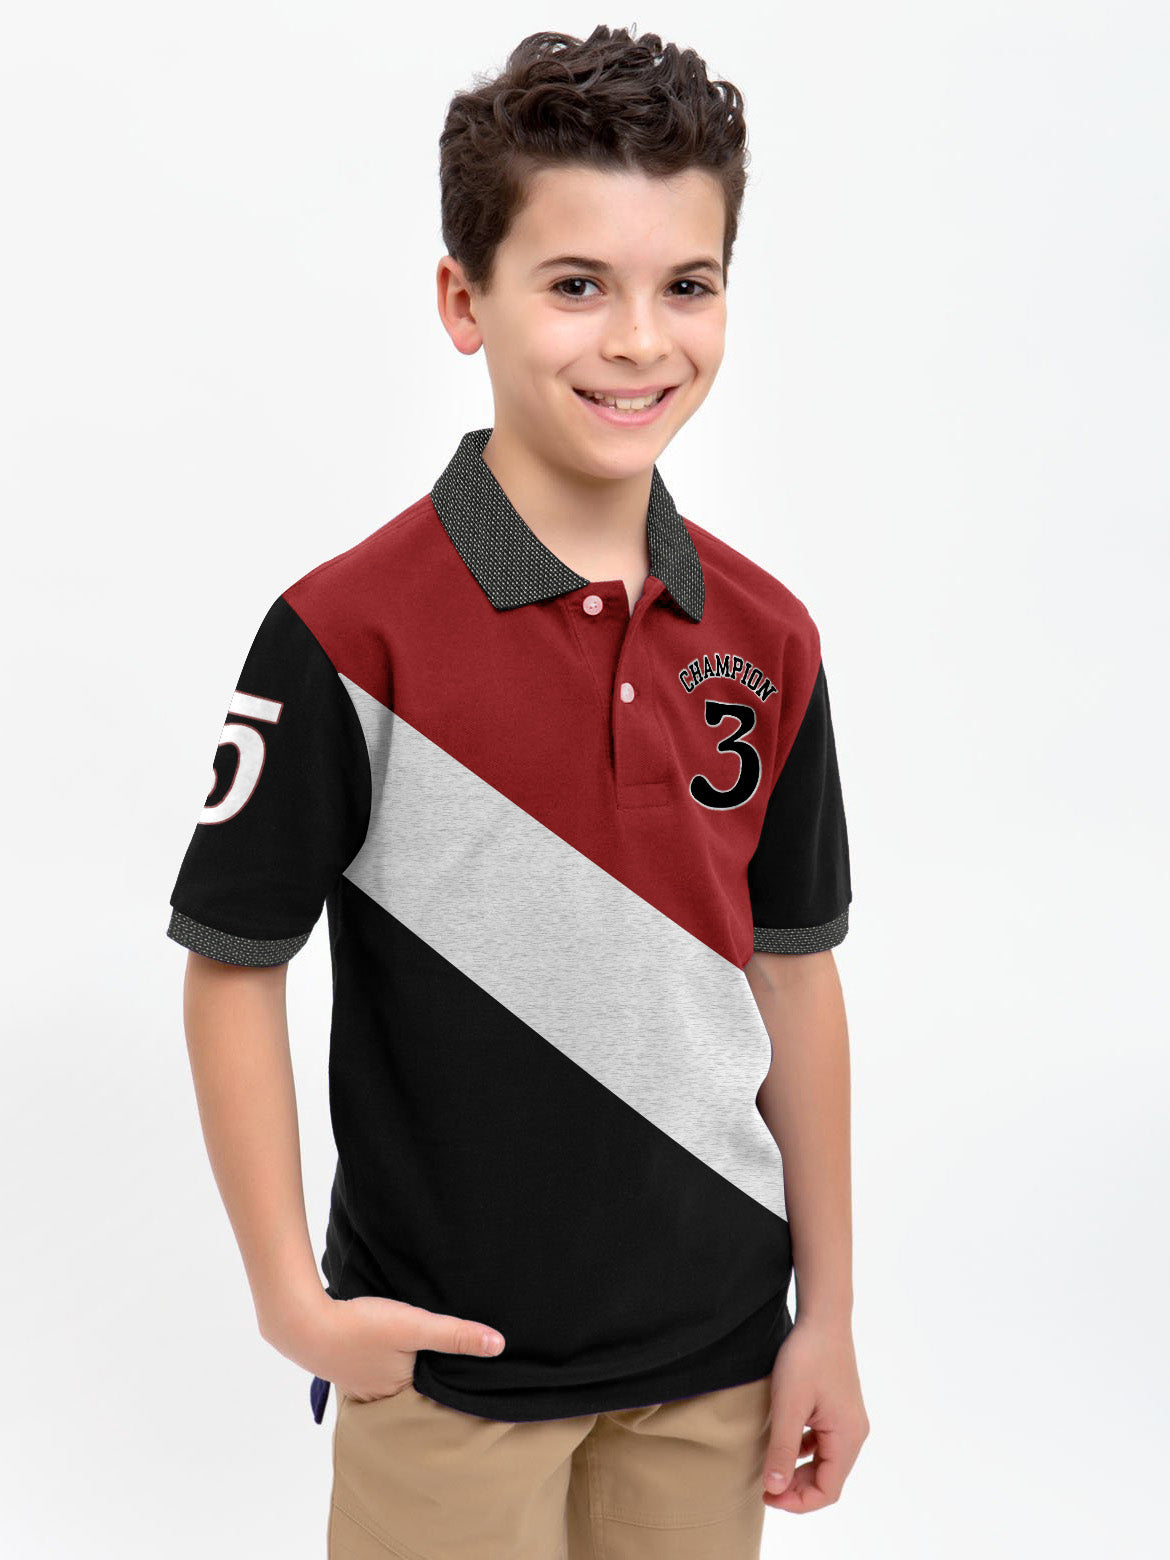 Champion Single Jersey Polo Shirt For Kids-Grey Melange with Black & Red Panels-SP1696